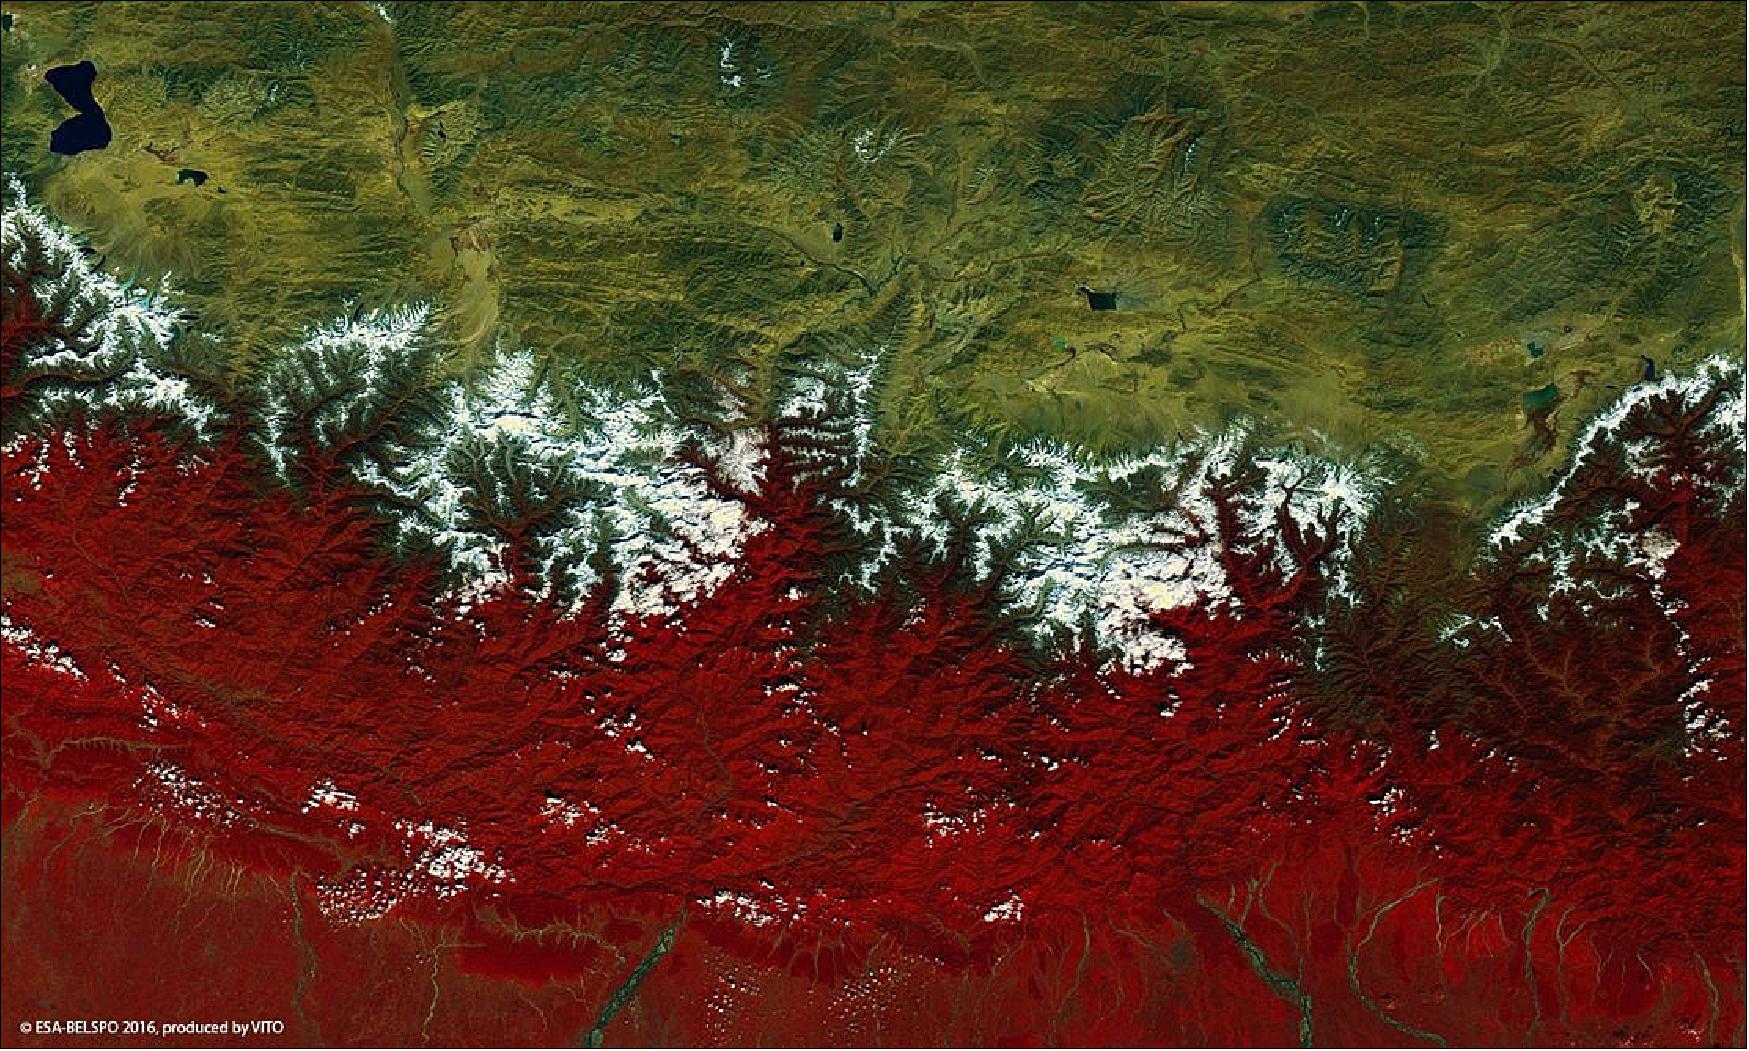 Figure 44: PROBA-V – ESA's smallest Earth-observing mission – overflies Mount Everest, the highest mountain in the world, its peak seen left of center in this false-color image. This 100 m-resolution image was acquired by PROBA-V on 27 October 2016 (image credit: ESA/BELSPO – produced by VITO)